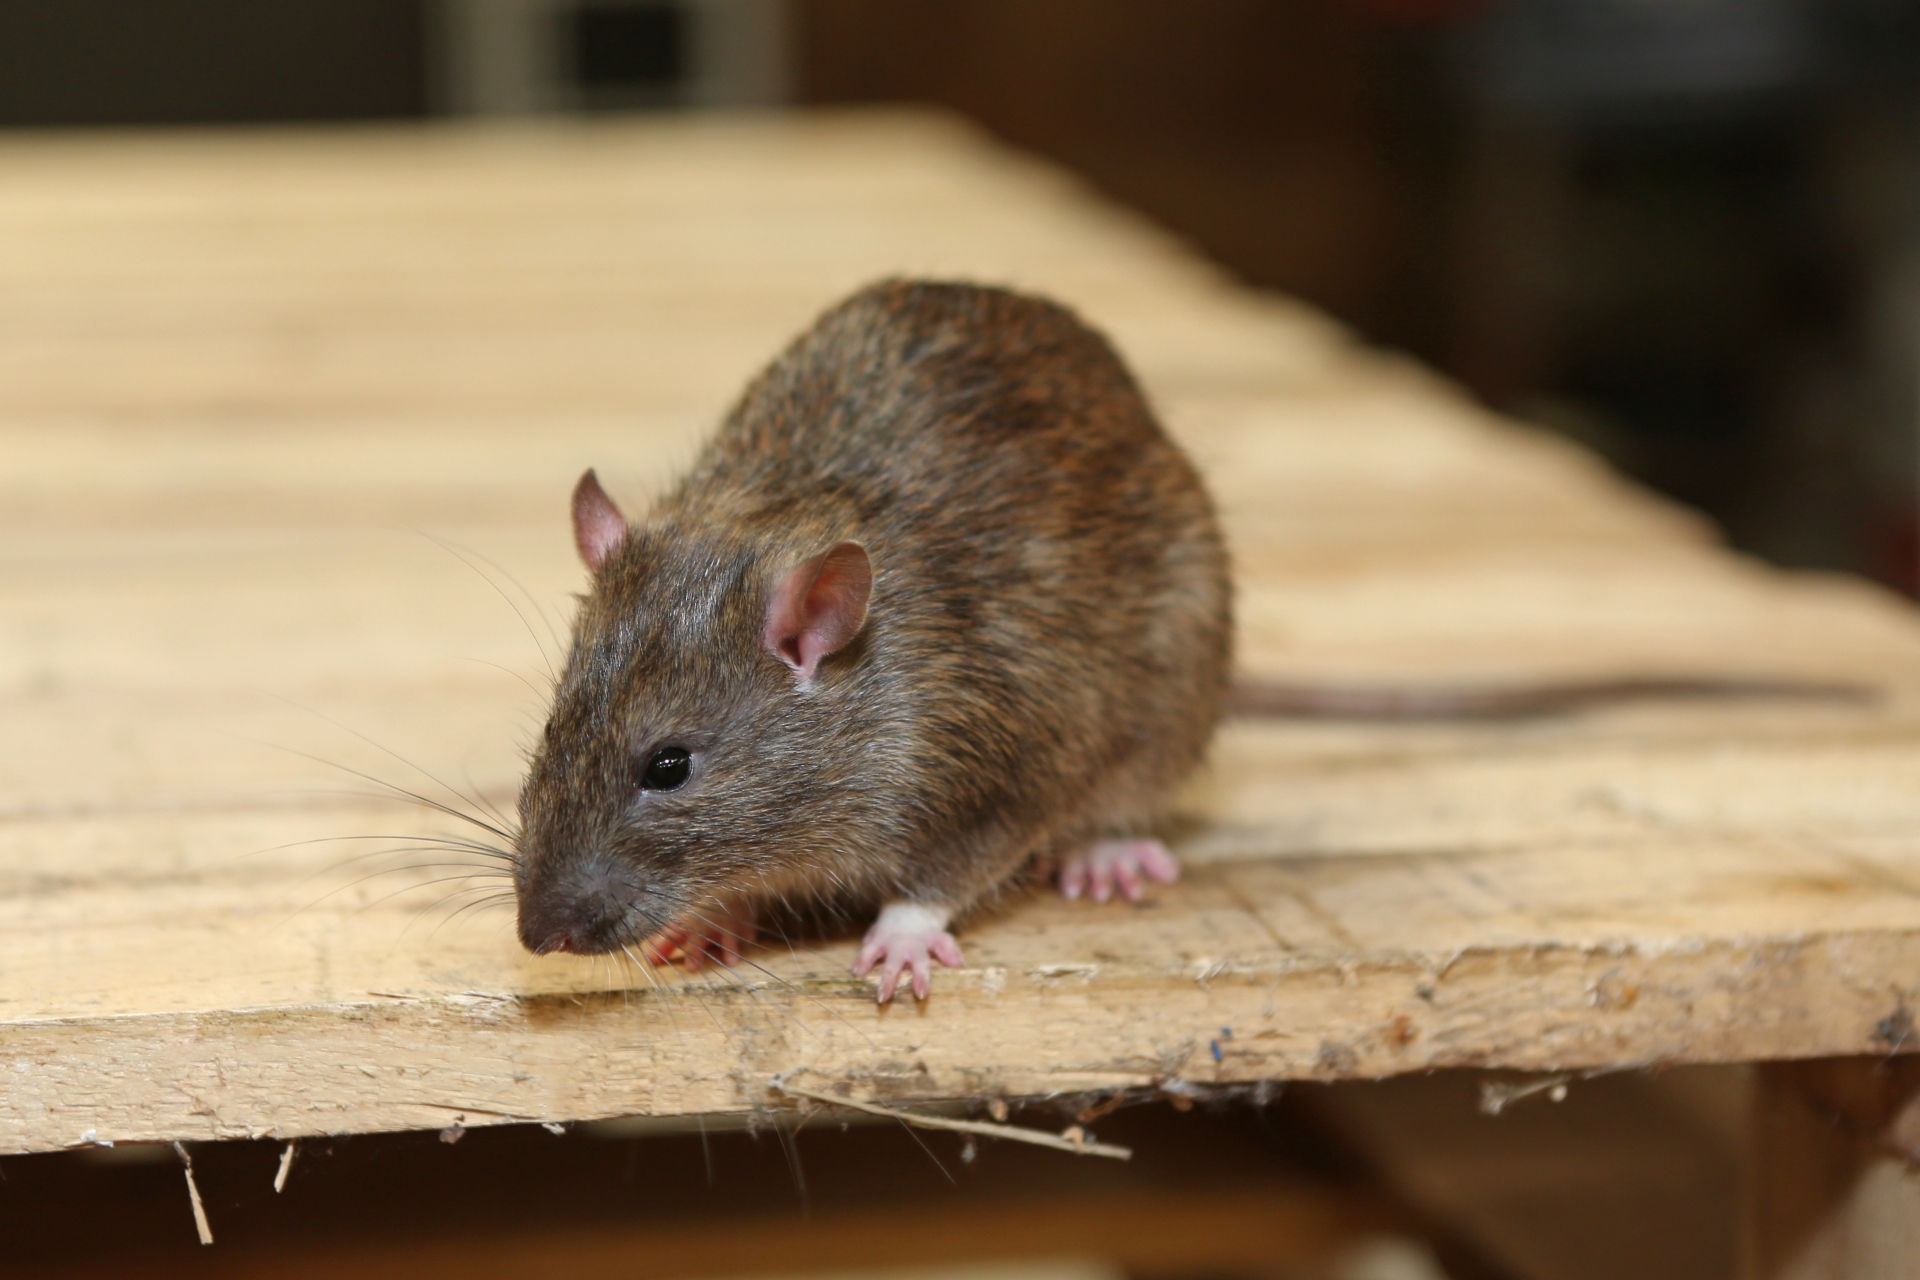 Rat extermination, Pest Control in Forest Hill, SE23. Call Now 020 8166 9746